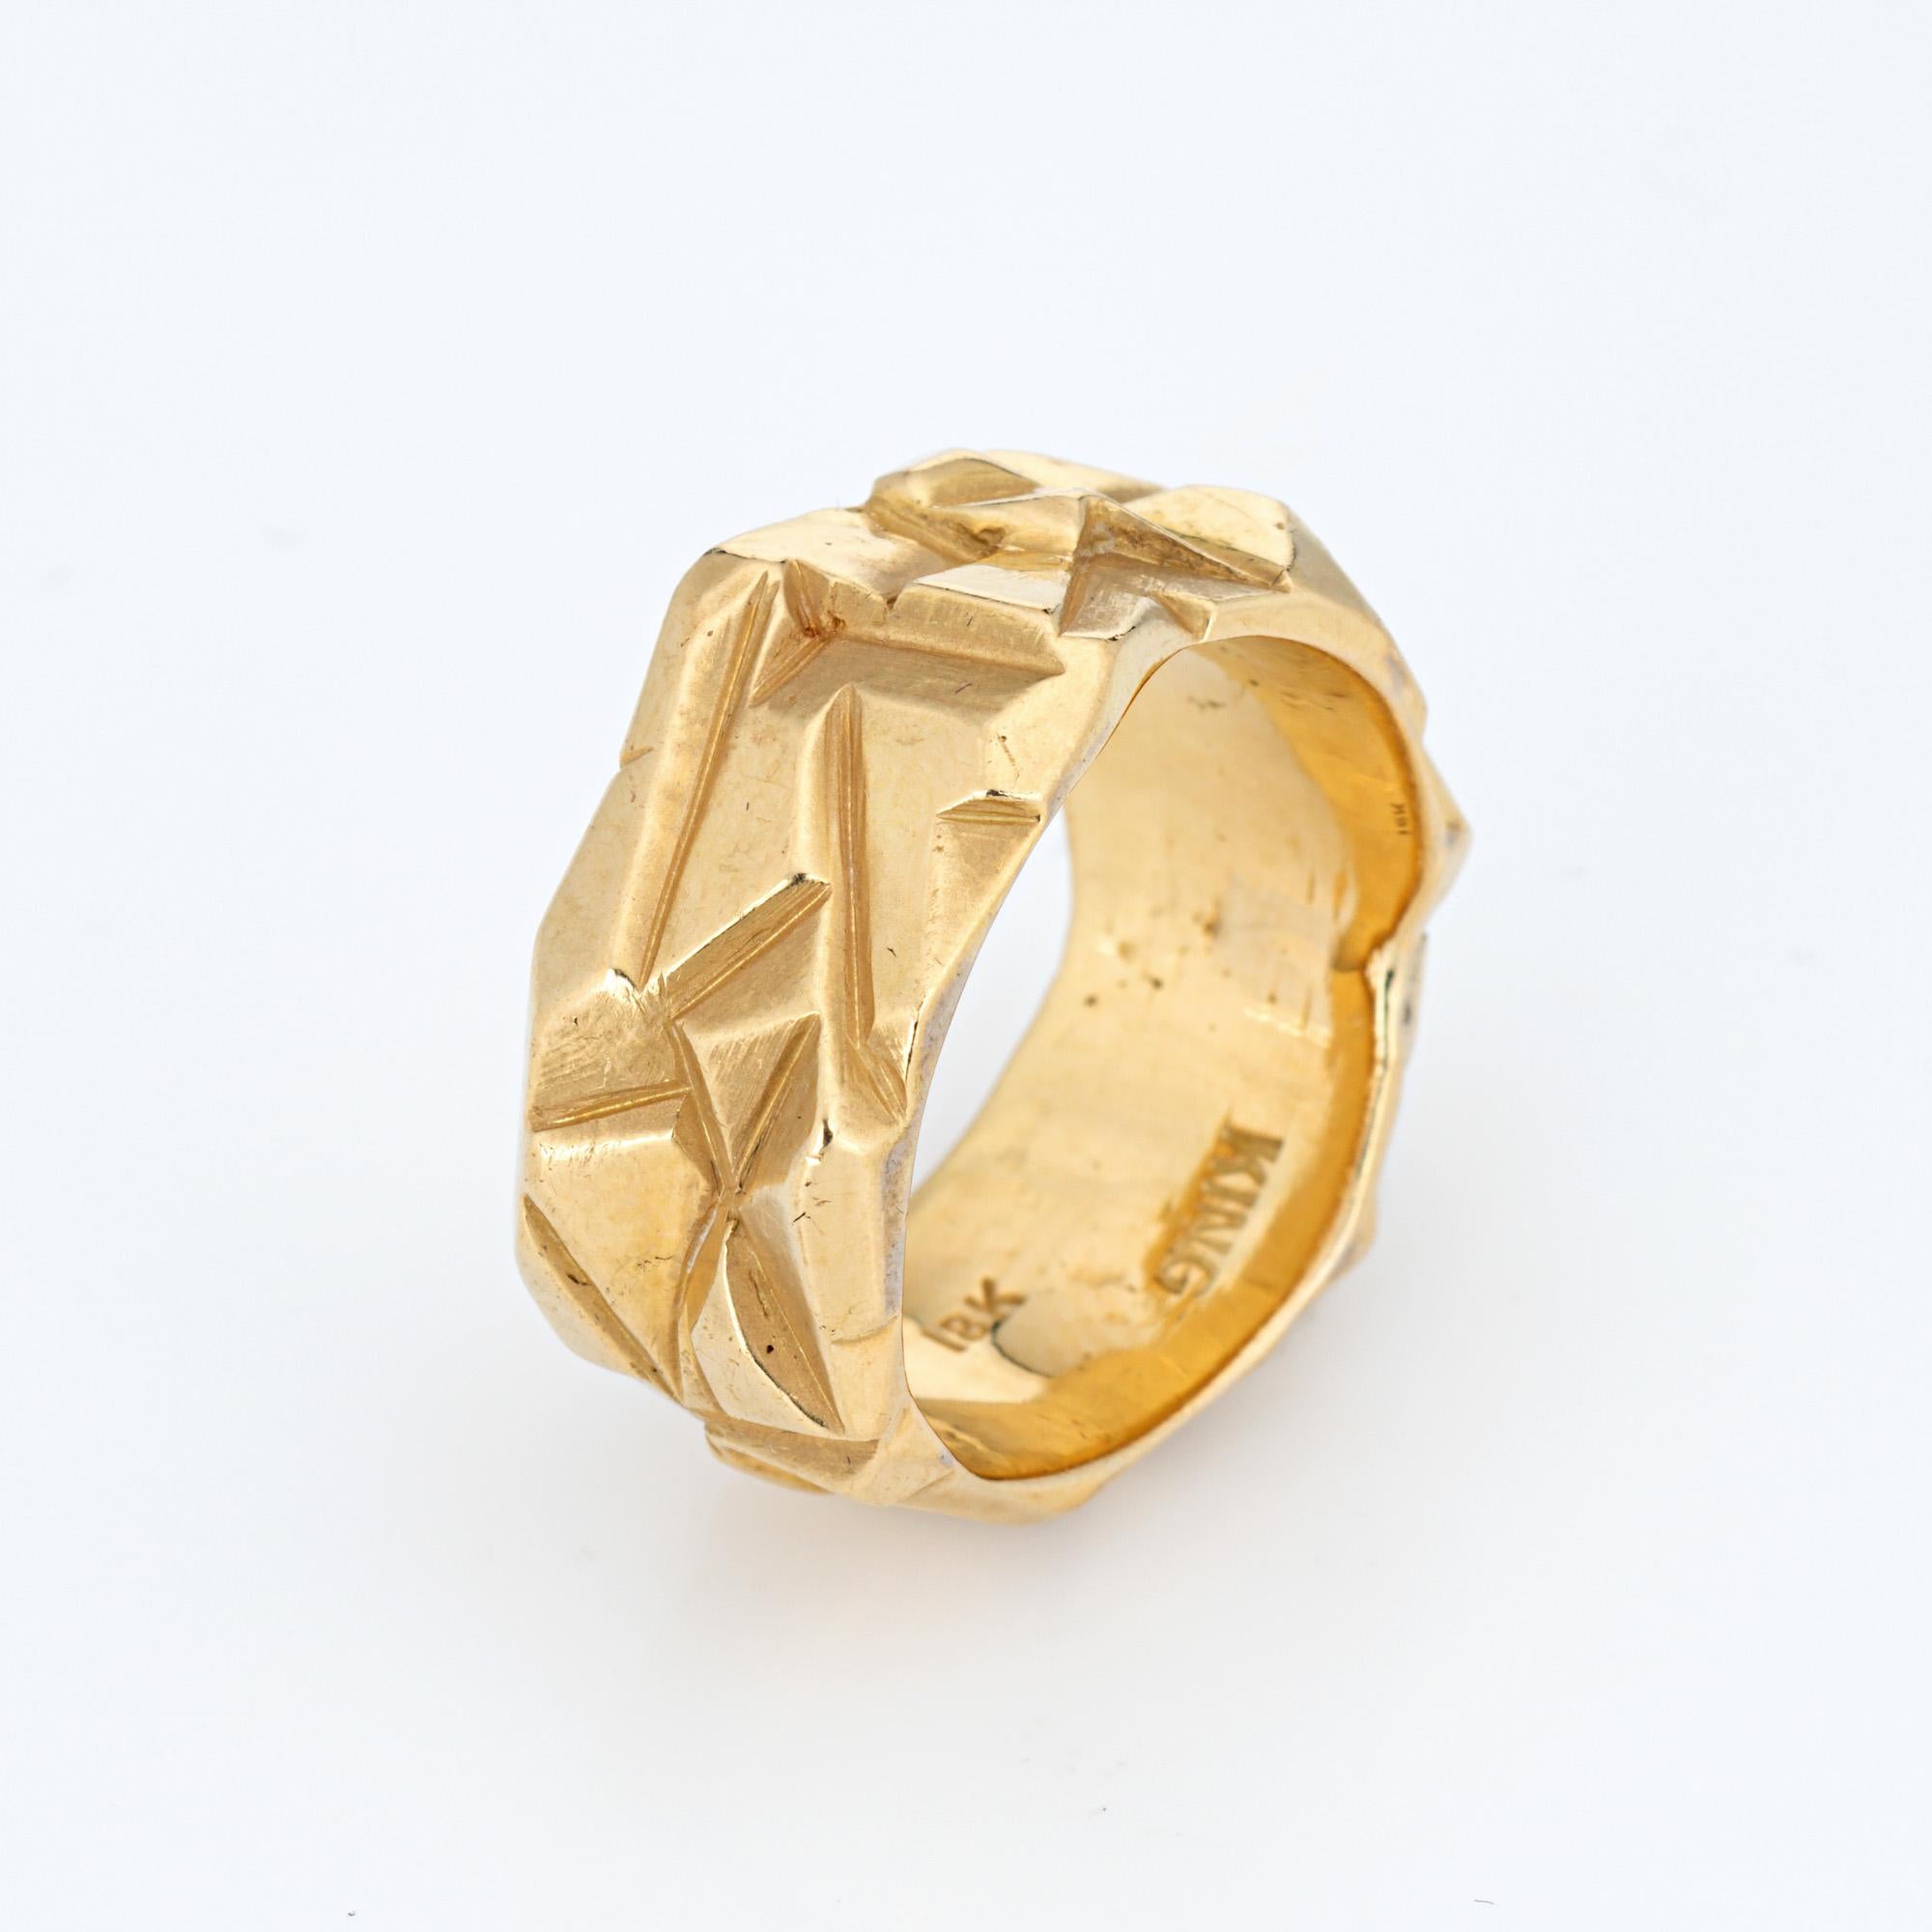 Vintage Arthur King ring crafted in 18 karat yellow gold (circa 1970s).  

Crafted by artist and goldsmith Arthur King, the ring is made in the lost wax method with geometric patterns in random form around the entire band. The ring is great worn